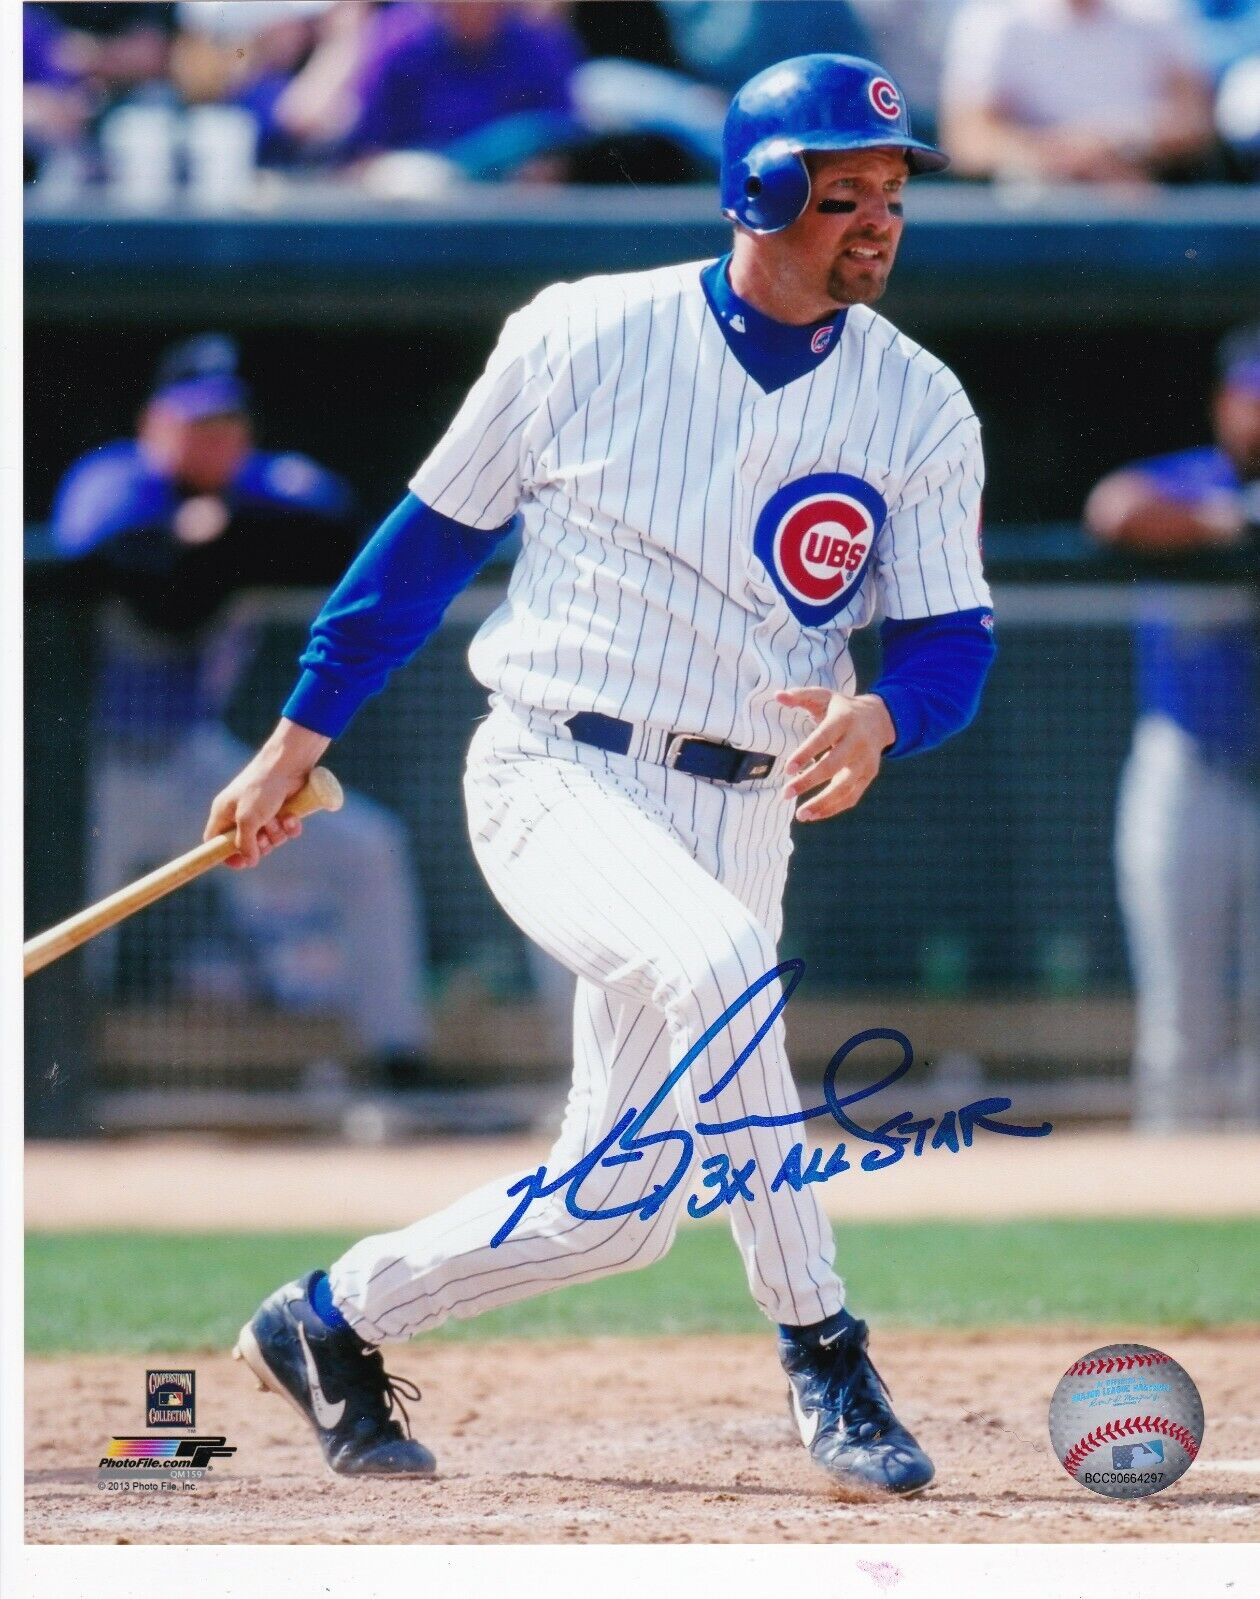 MARK GRACE CHICAGO CUBS 3 X ALL STAR ACTION SIGNED 8x10